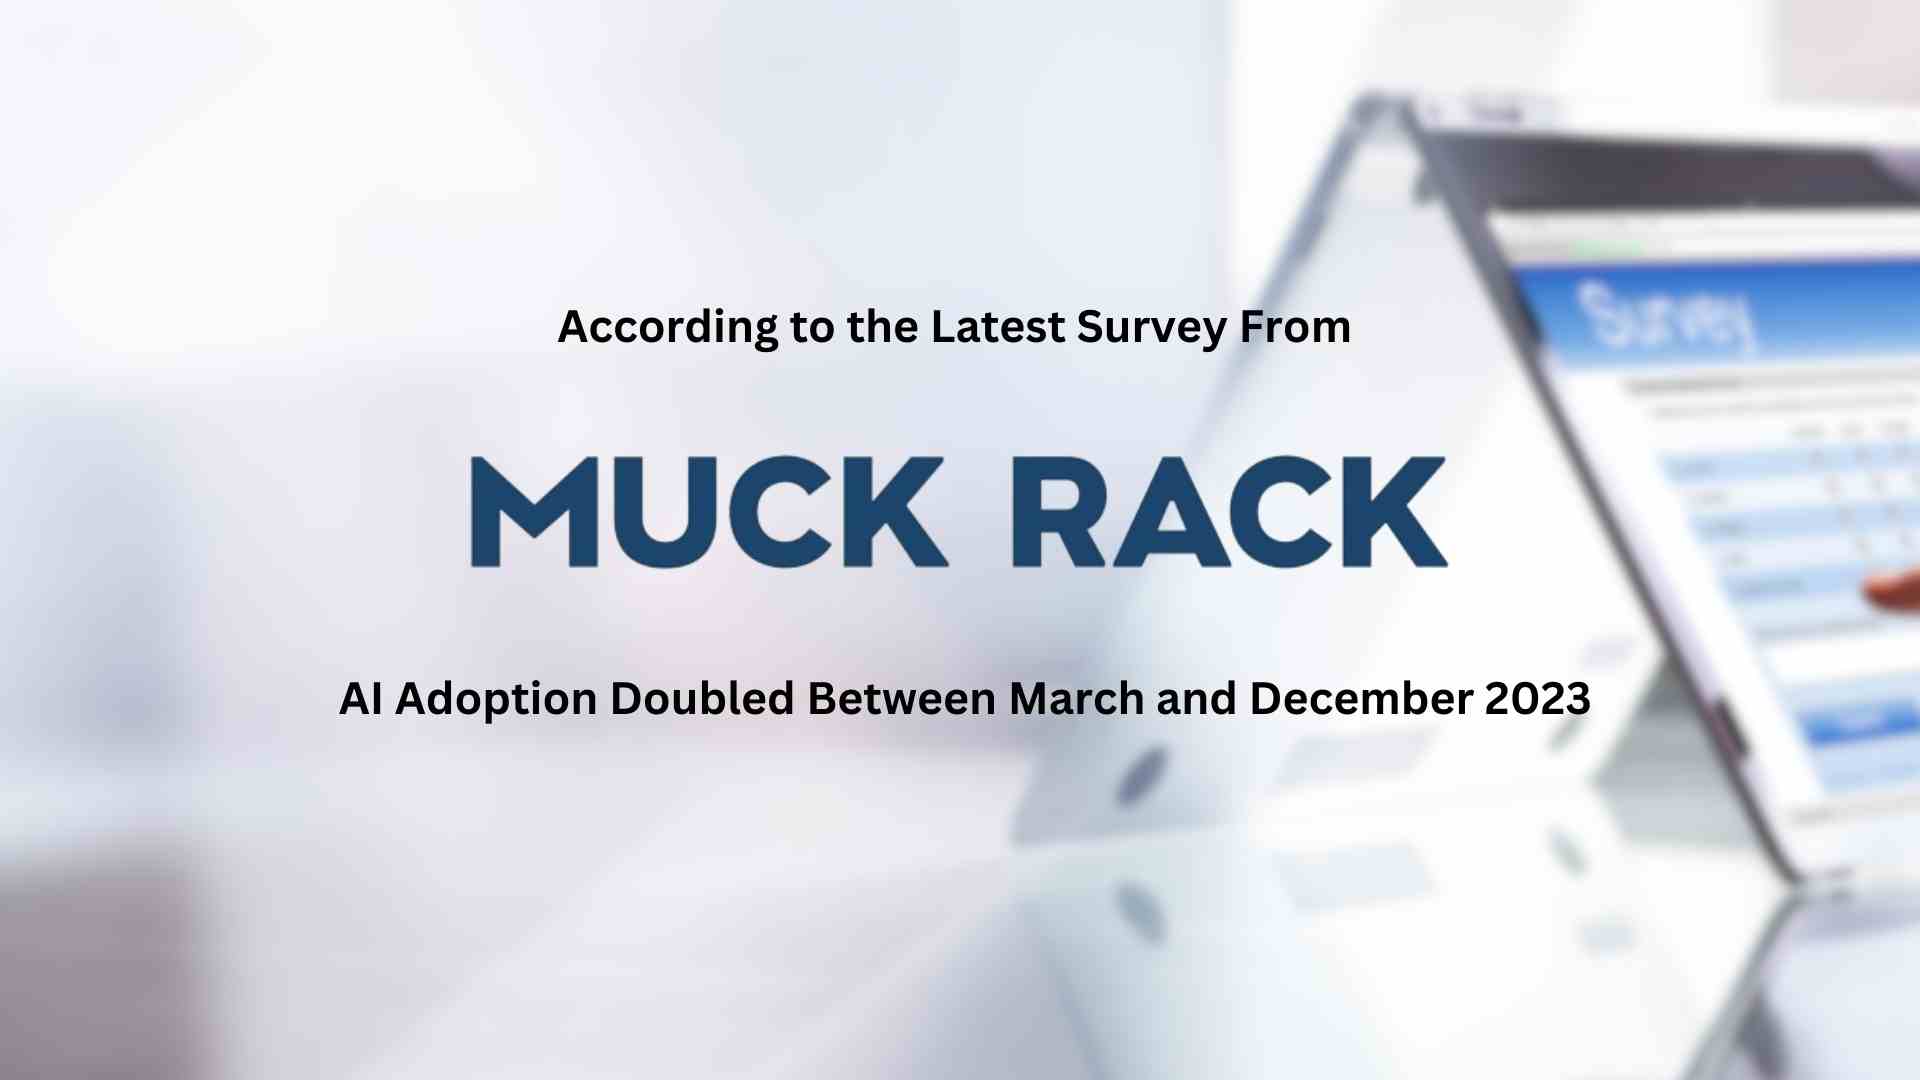 Muck Rack Survey Data: AI Adoption Doubled Between March and December 2023